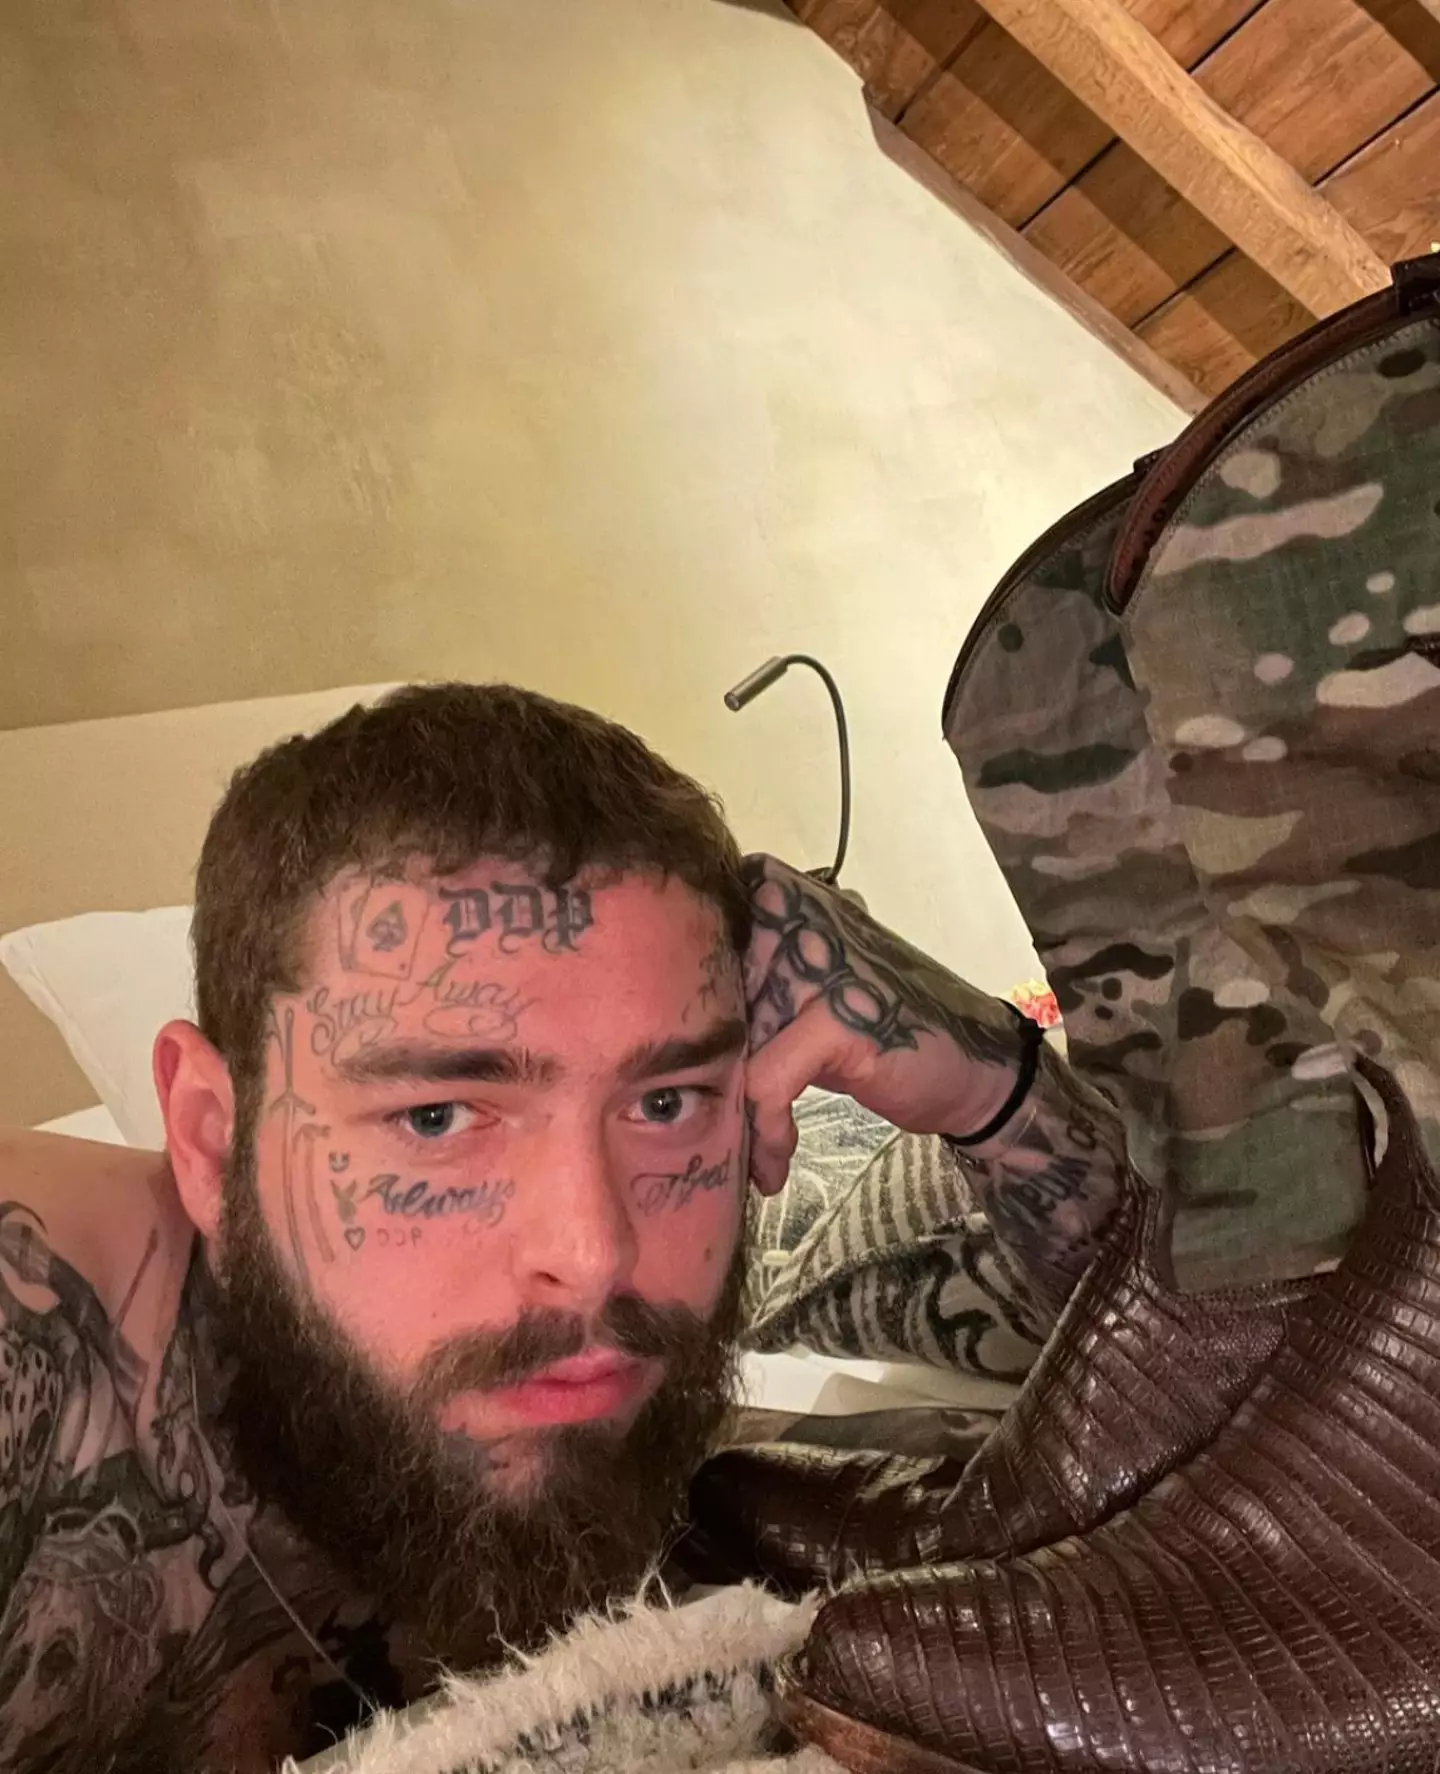 Post Malone has a daughter with his fianceé.